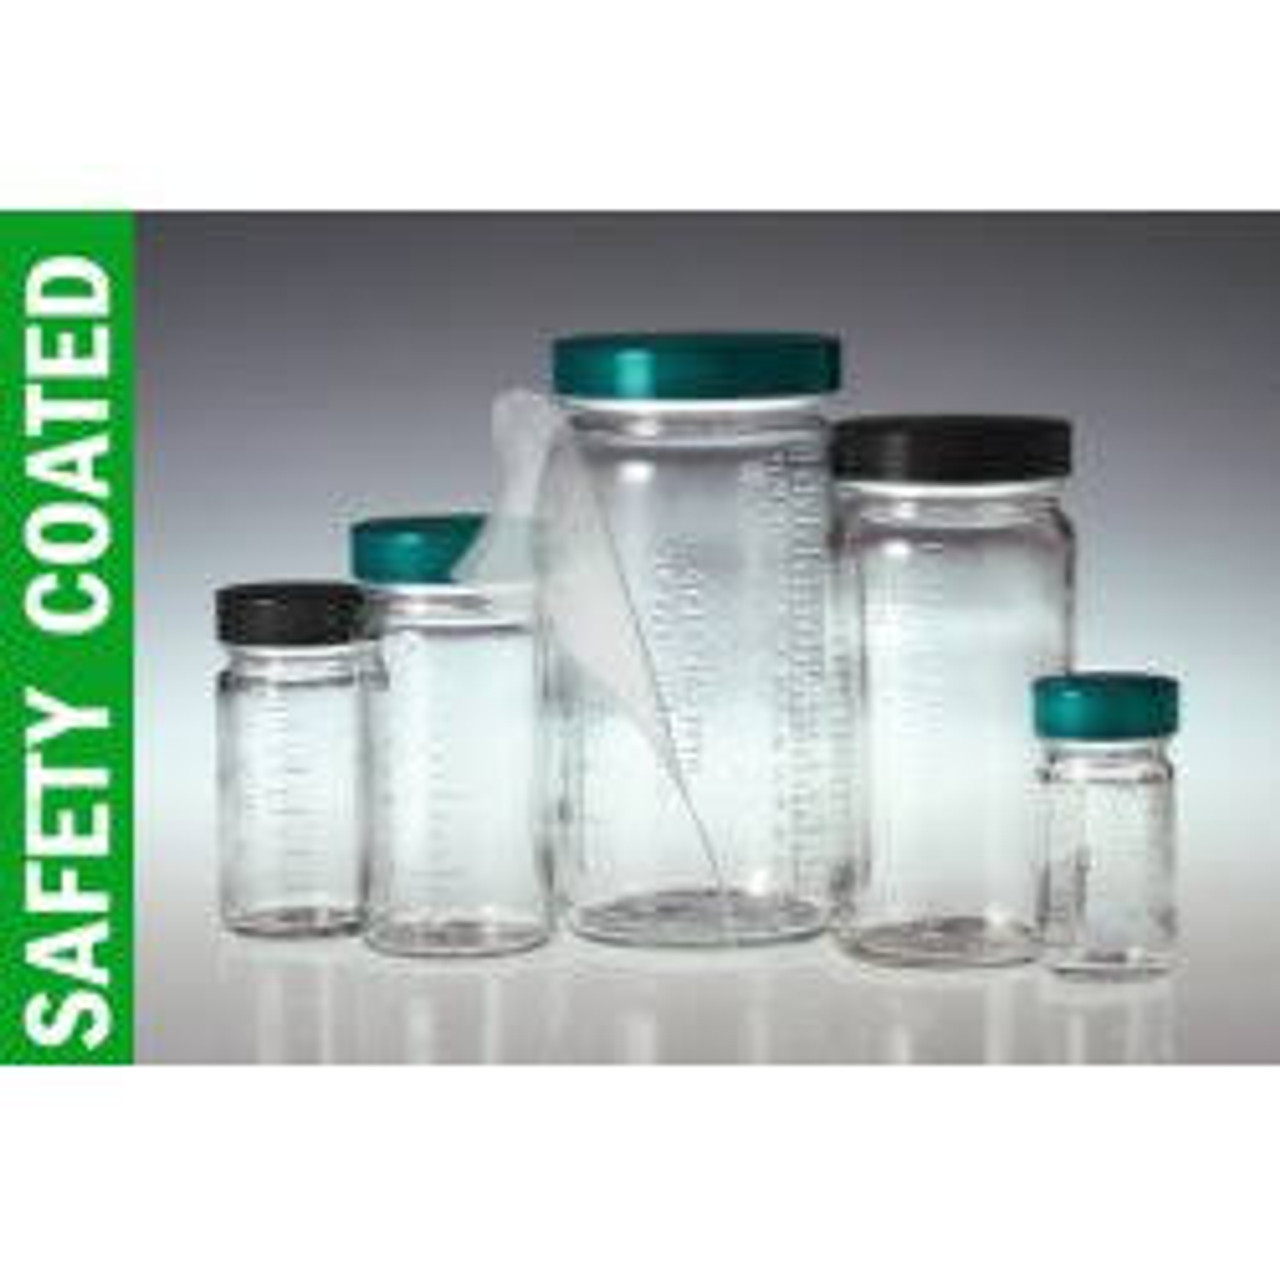 Clear Graduated Wide Mouth Jars, 2oz 38-400 neck finish, No Caps, case/48